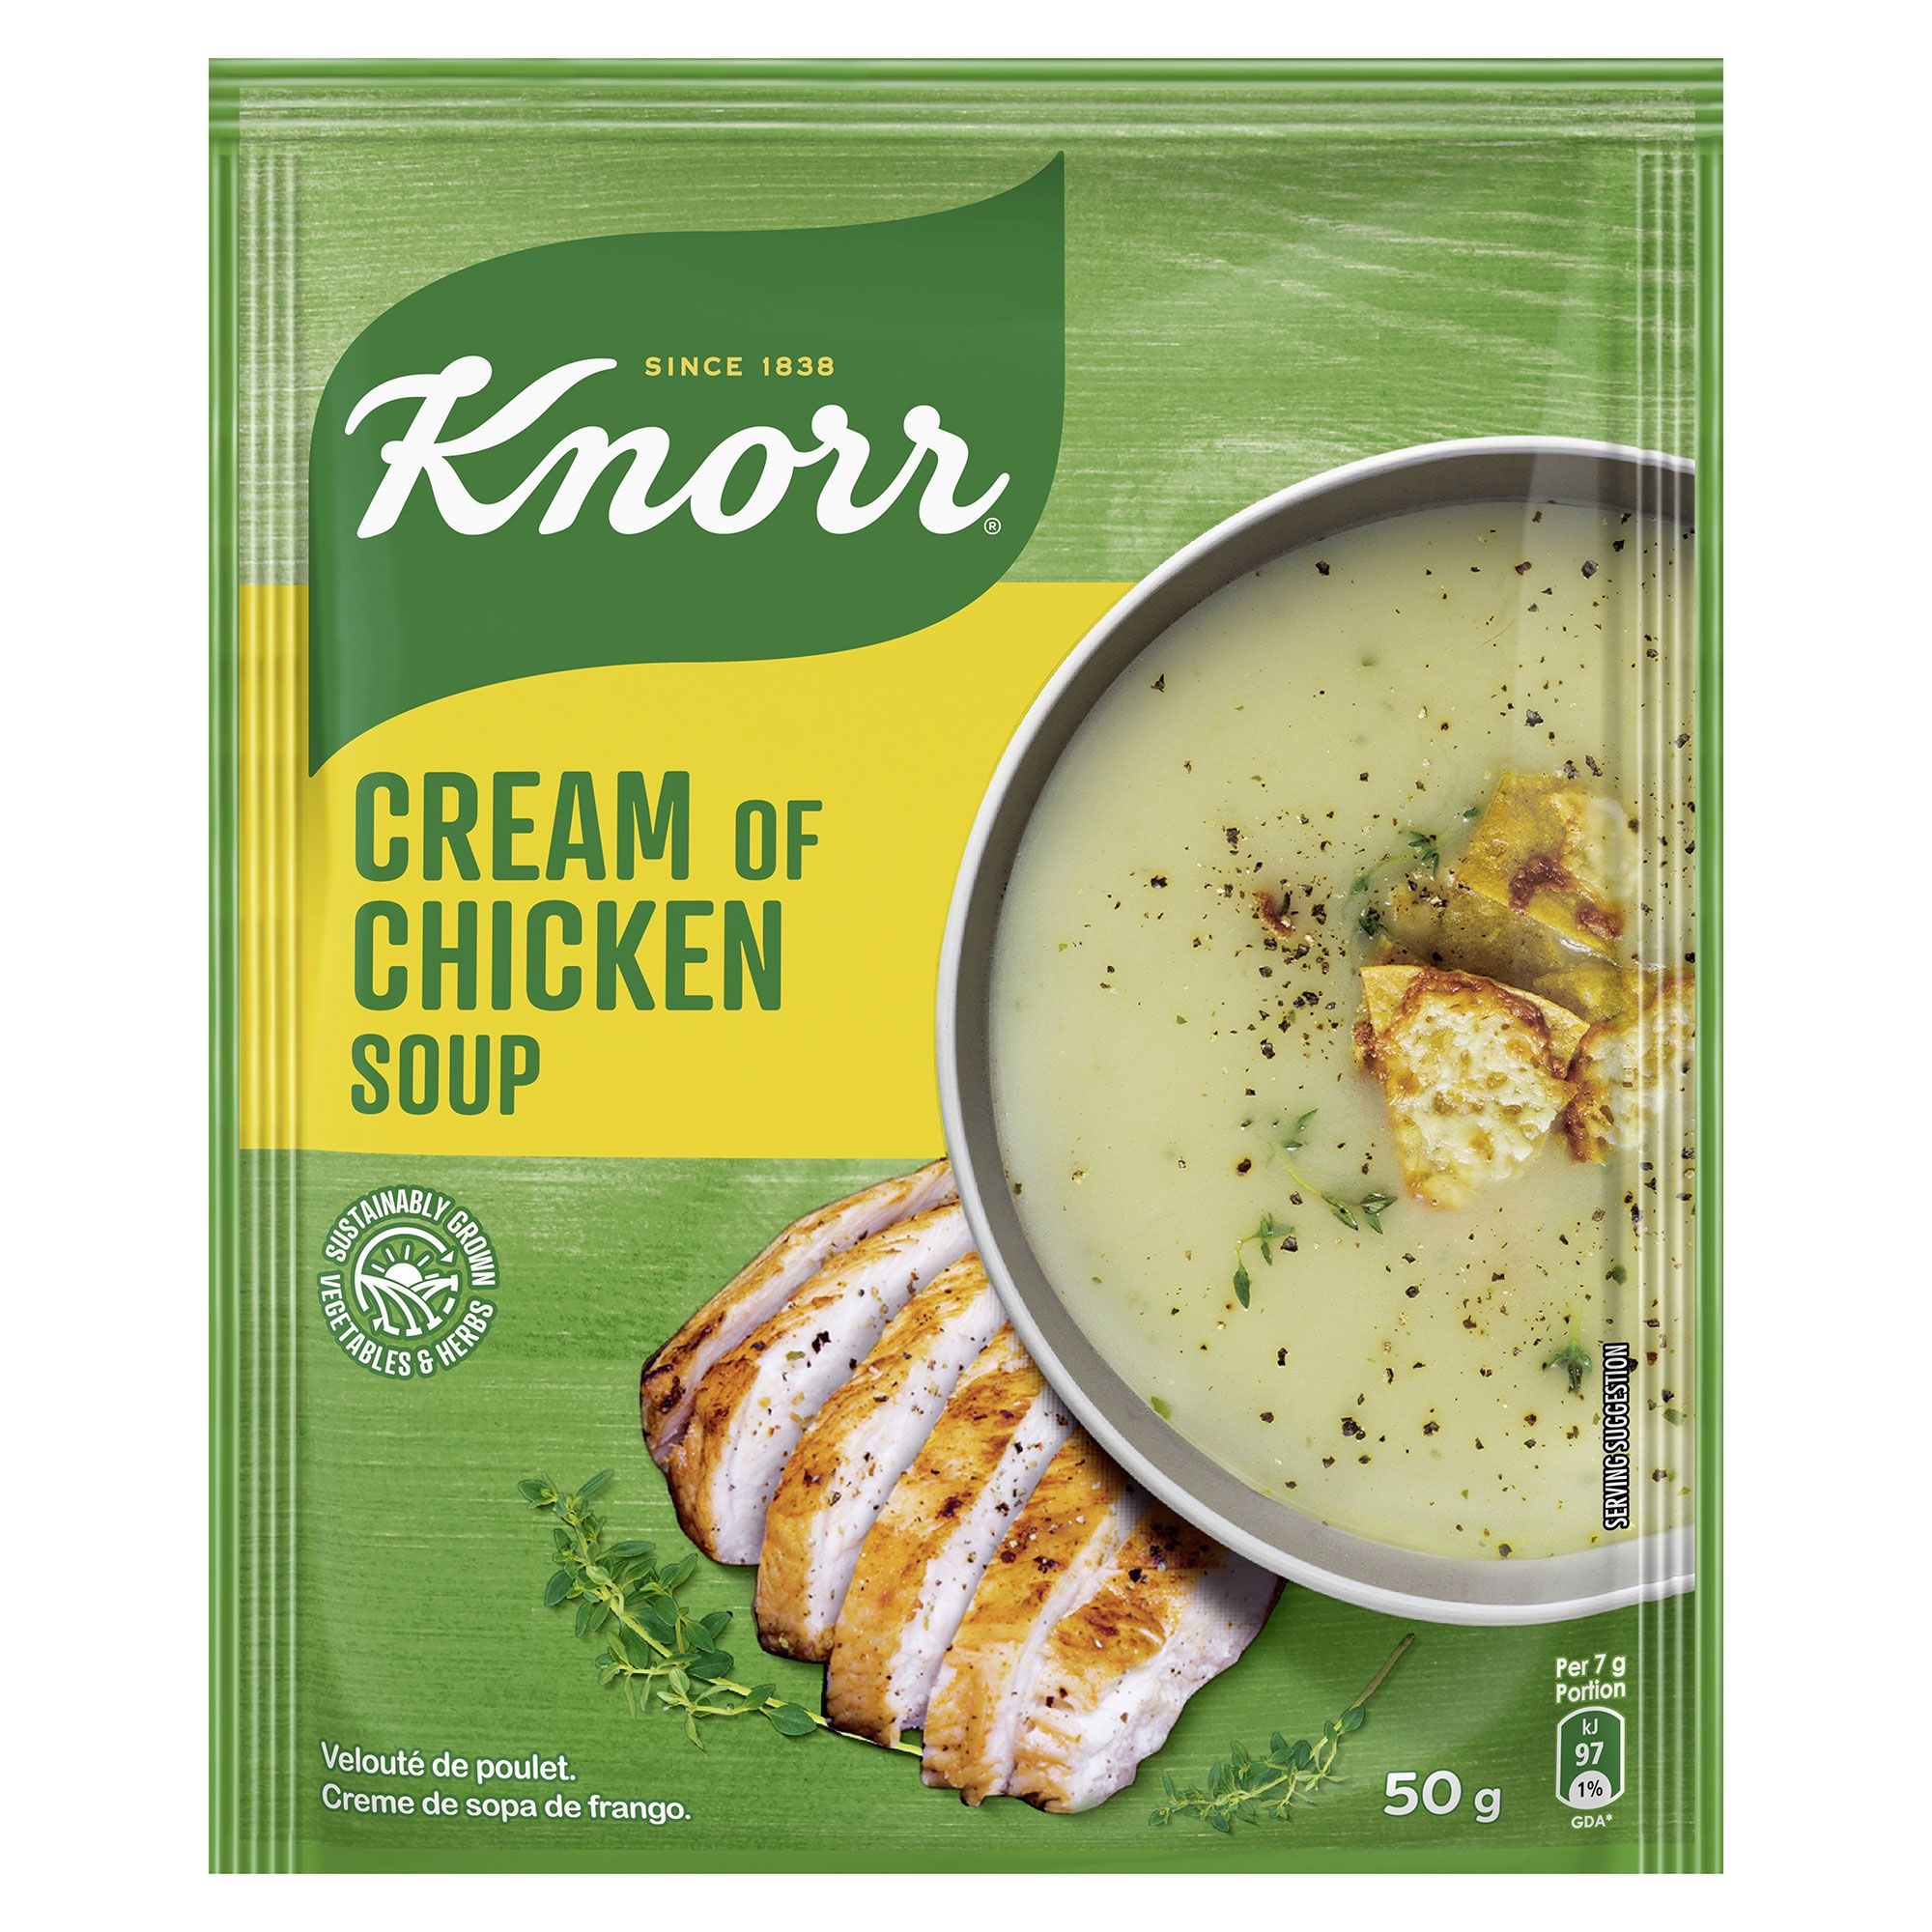 Knorr Cream of Chicken Soup